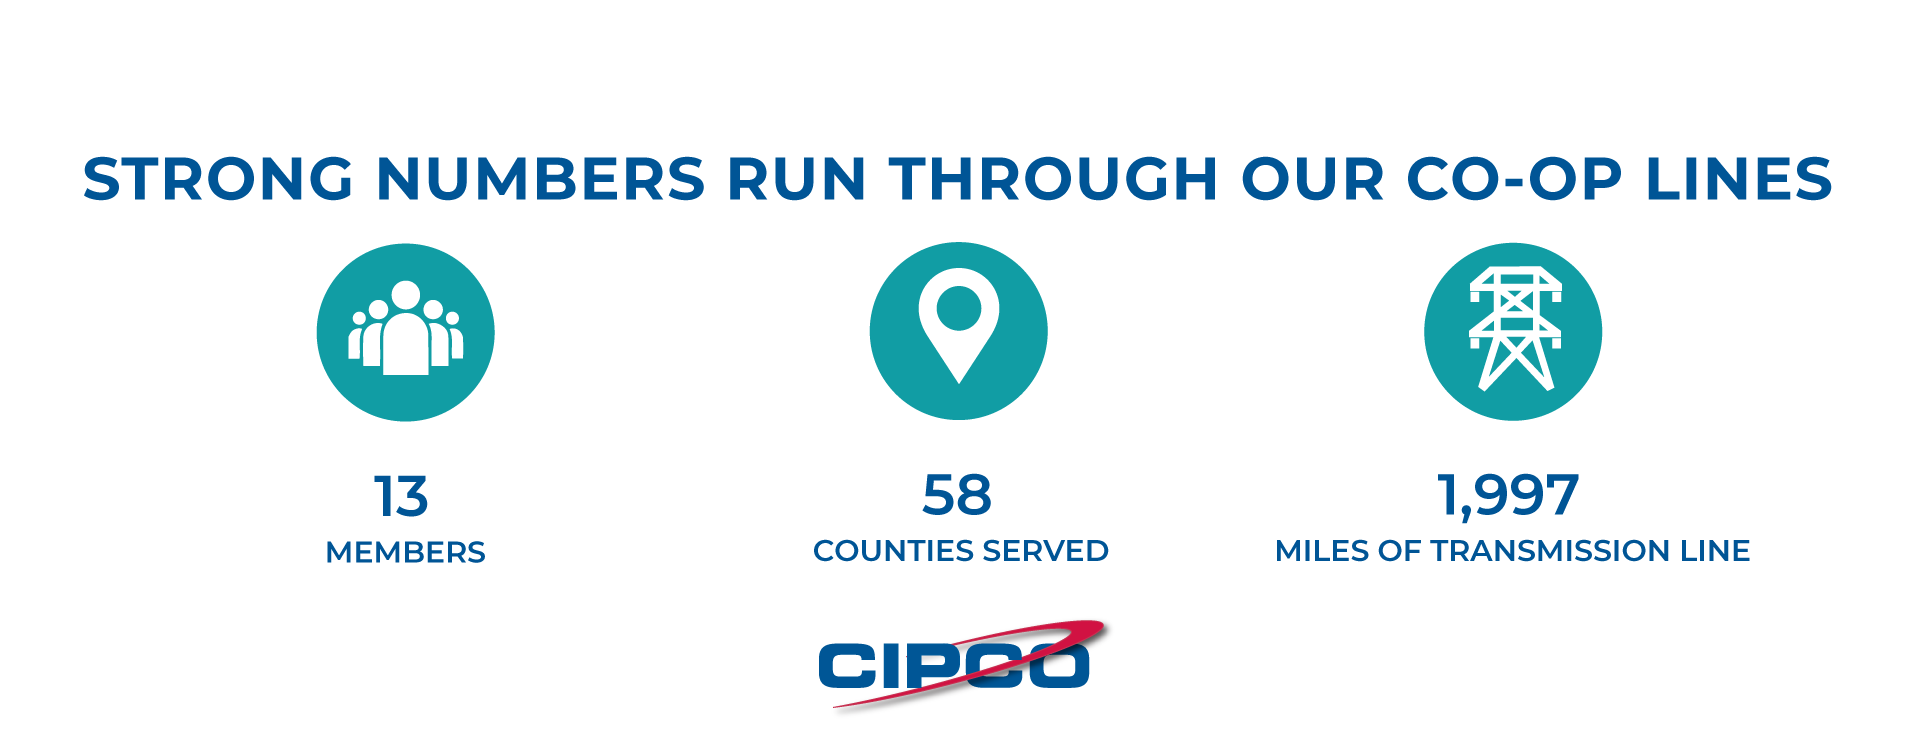 CIPCO Facts - 13 members 58 counties served and 1997 miles of transmission lines